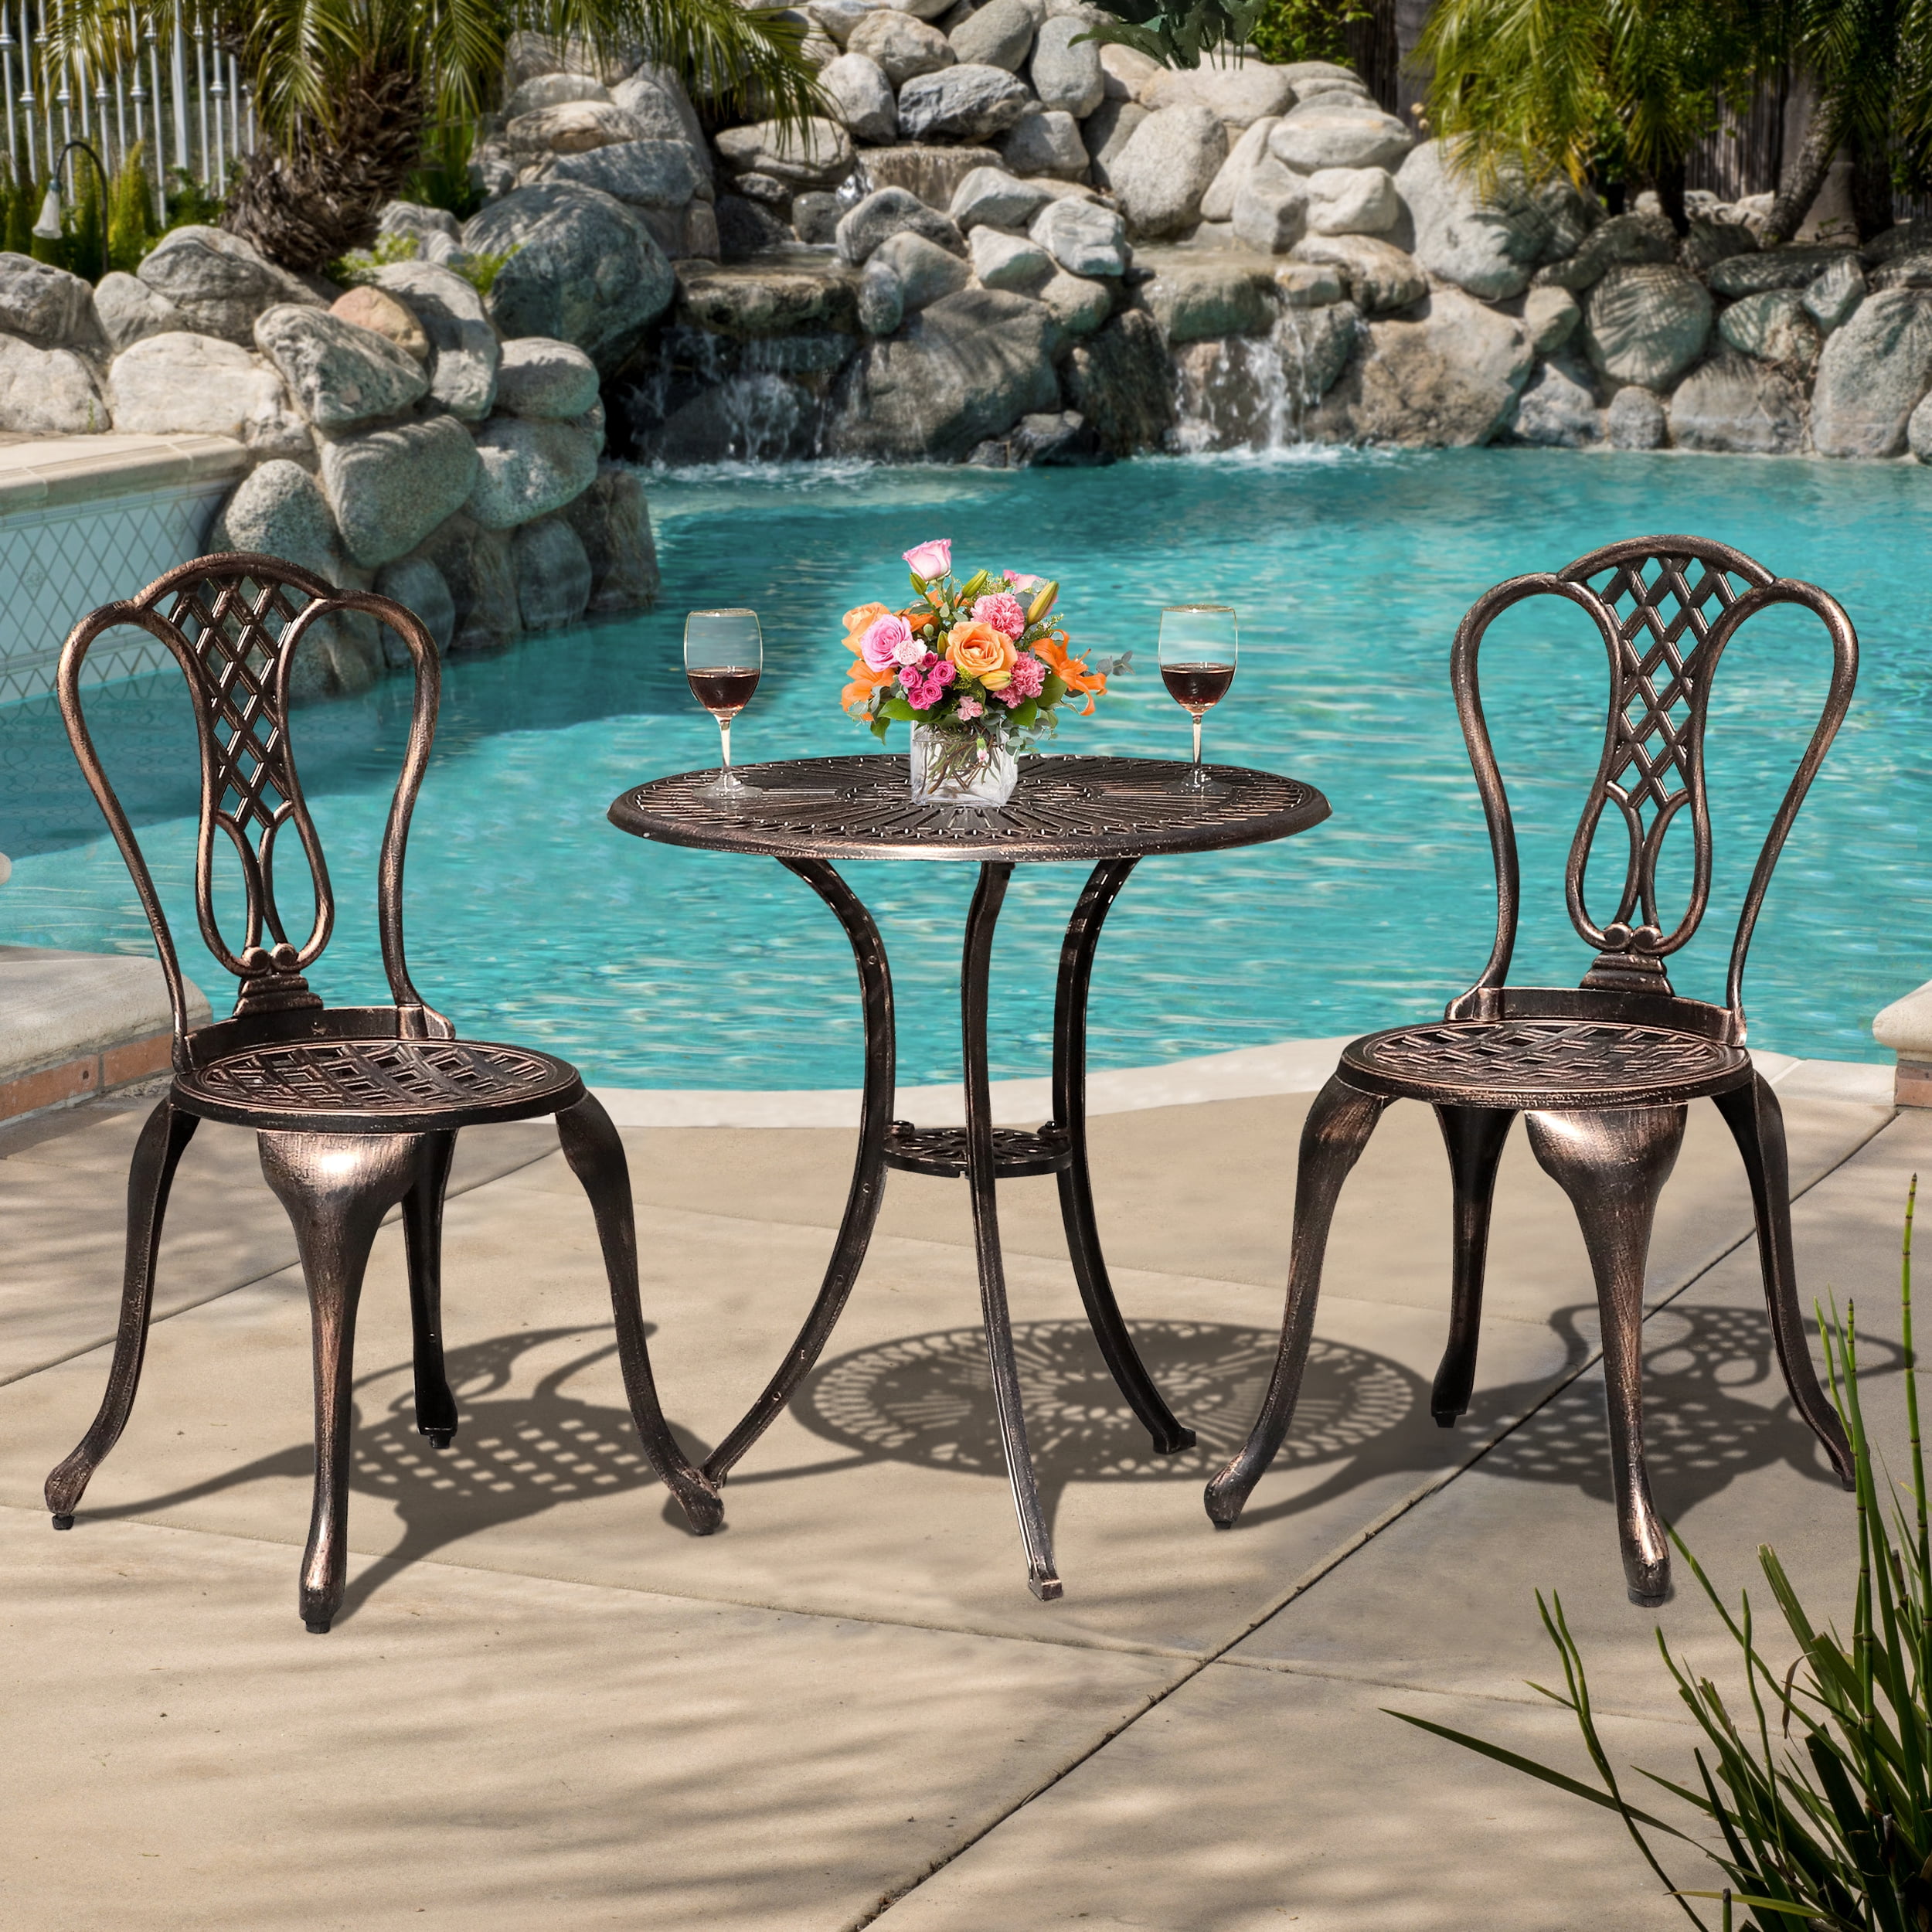 Bonnlo 3 Piece Bistro Set with Ice Bucket Antique Outdoor Patio Furniture Weather Resistant Garden Aluminum Table and Chairs for Backyard Pool 